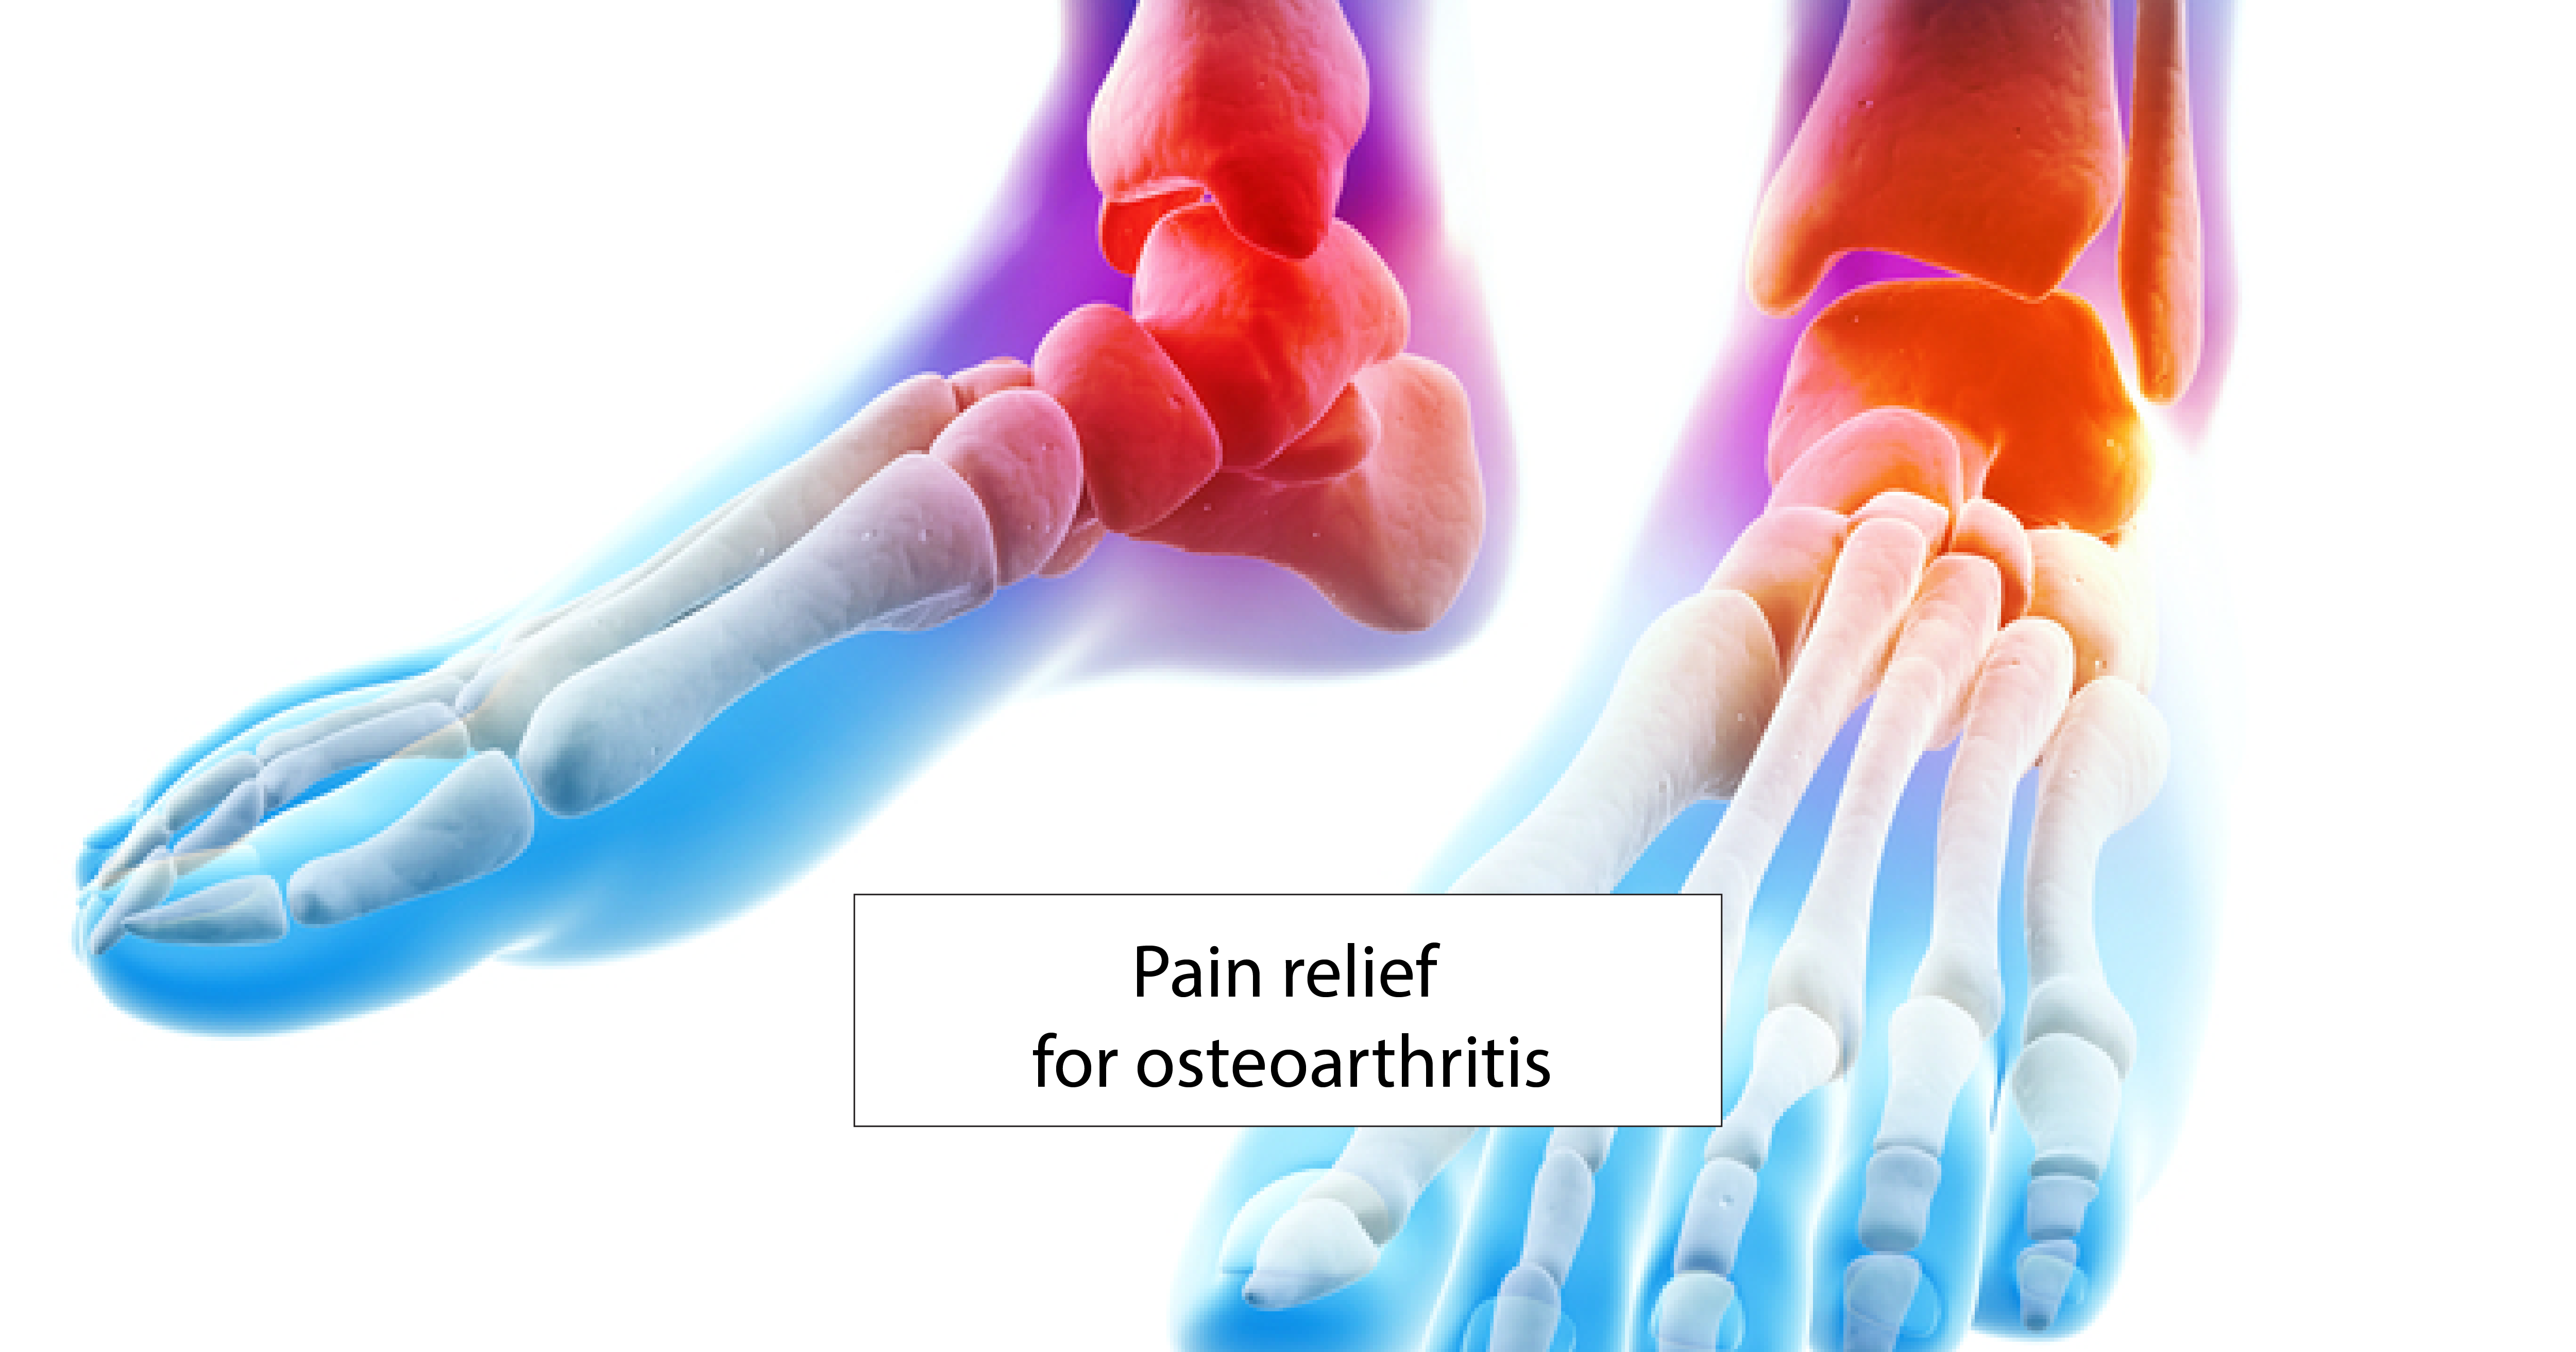 Pain relief for osteoarthritis: everything you need to know!